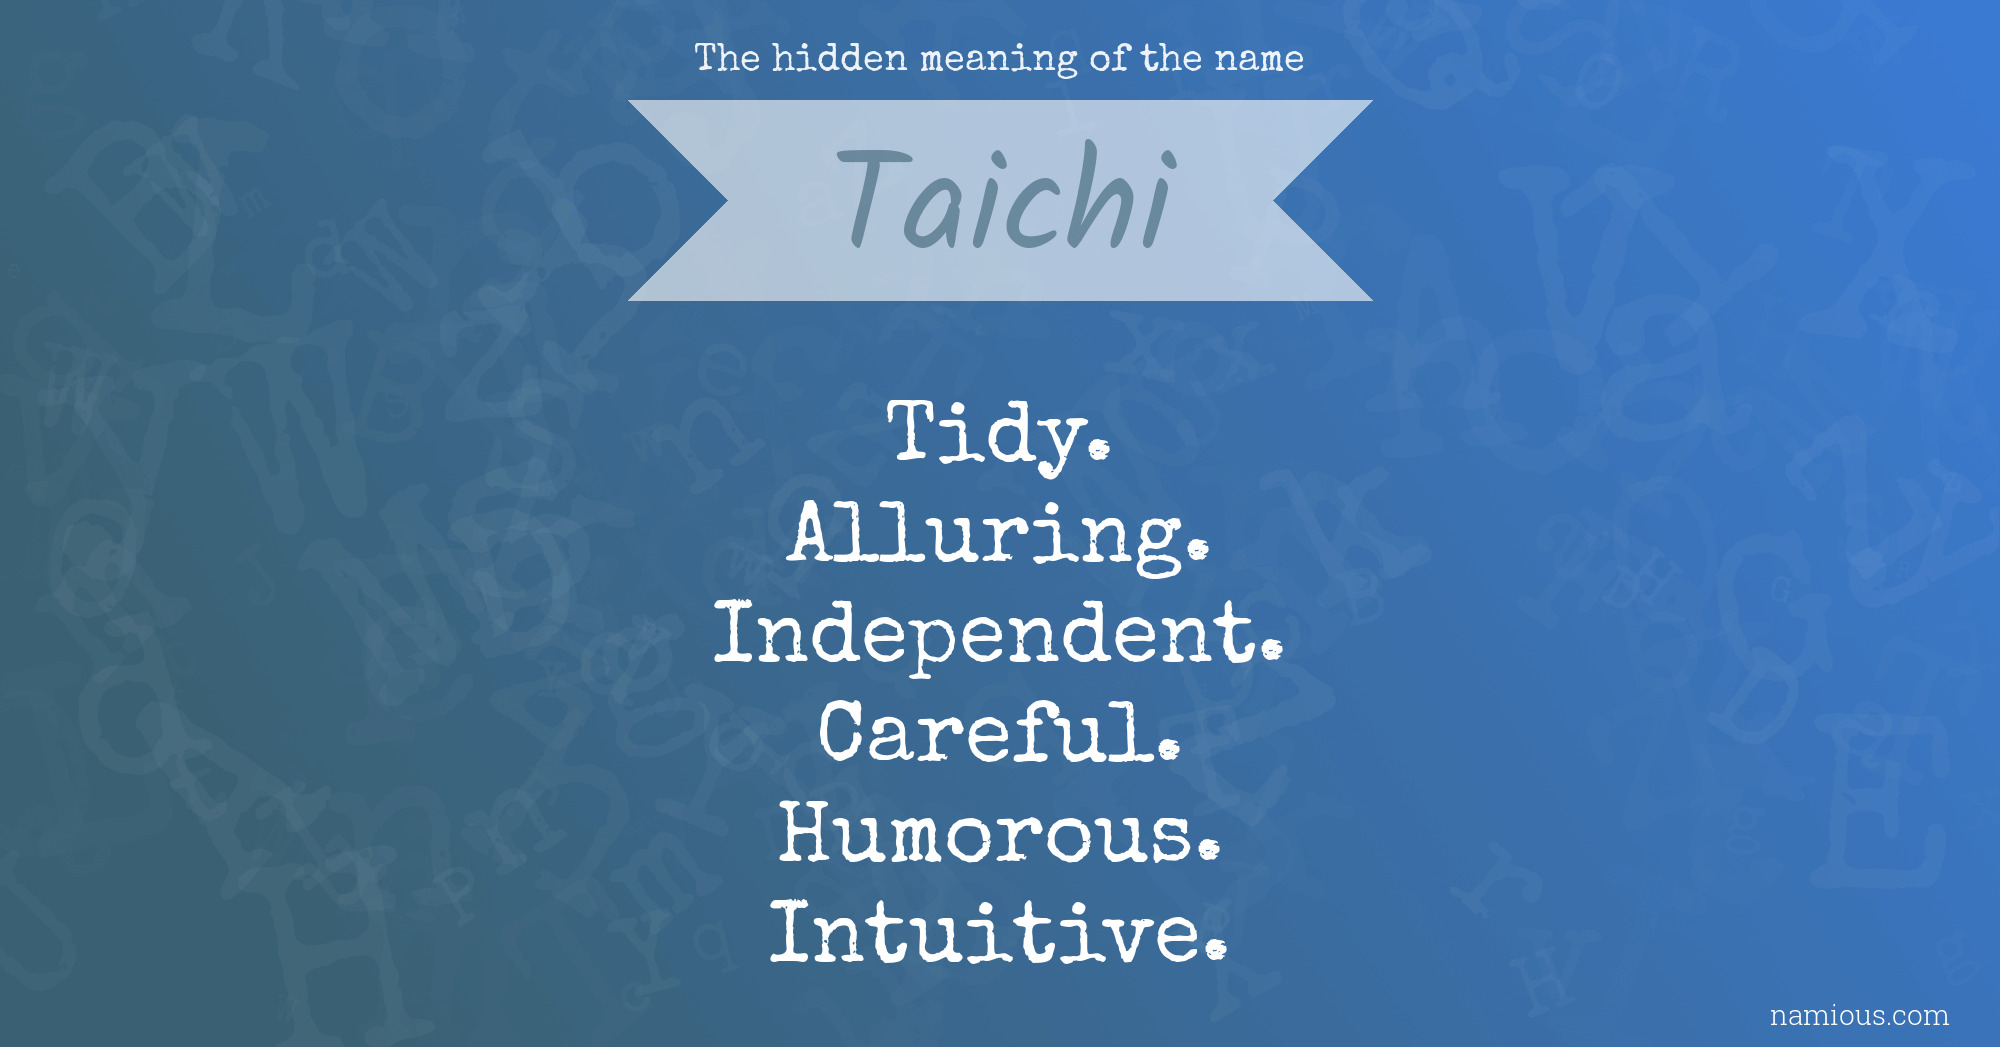 The hidden meaning of the name Taichi